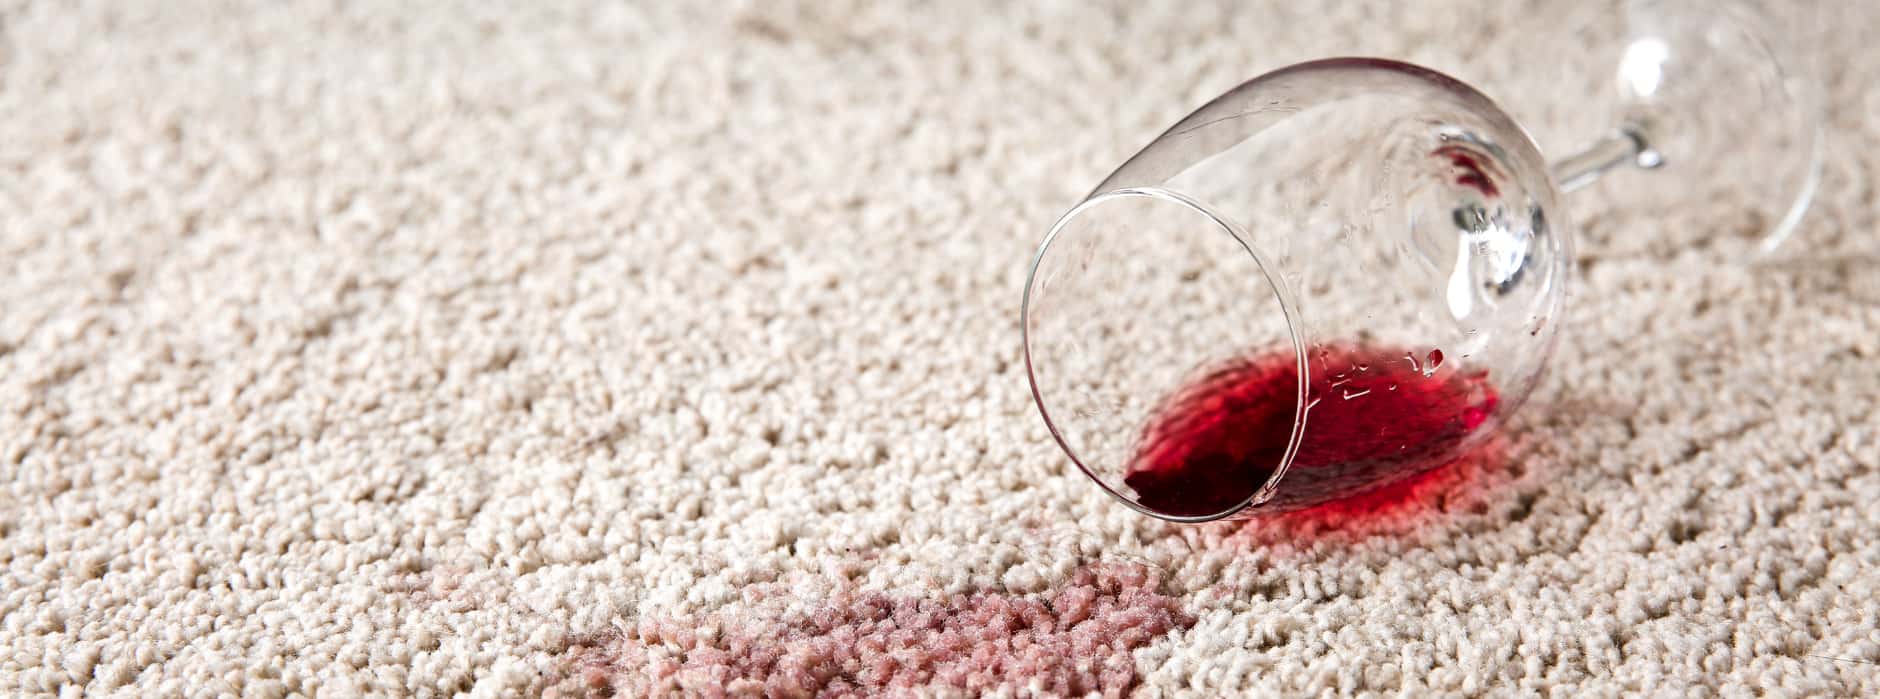 This is a photo of Borehamwood Carpet Cleaning red wine which has been spilt on a cream carpet. The glass is on its side